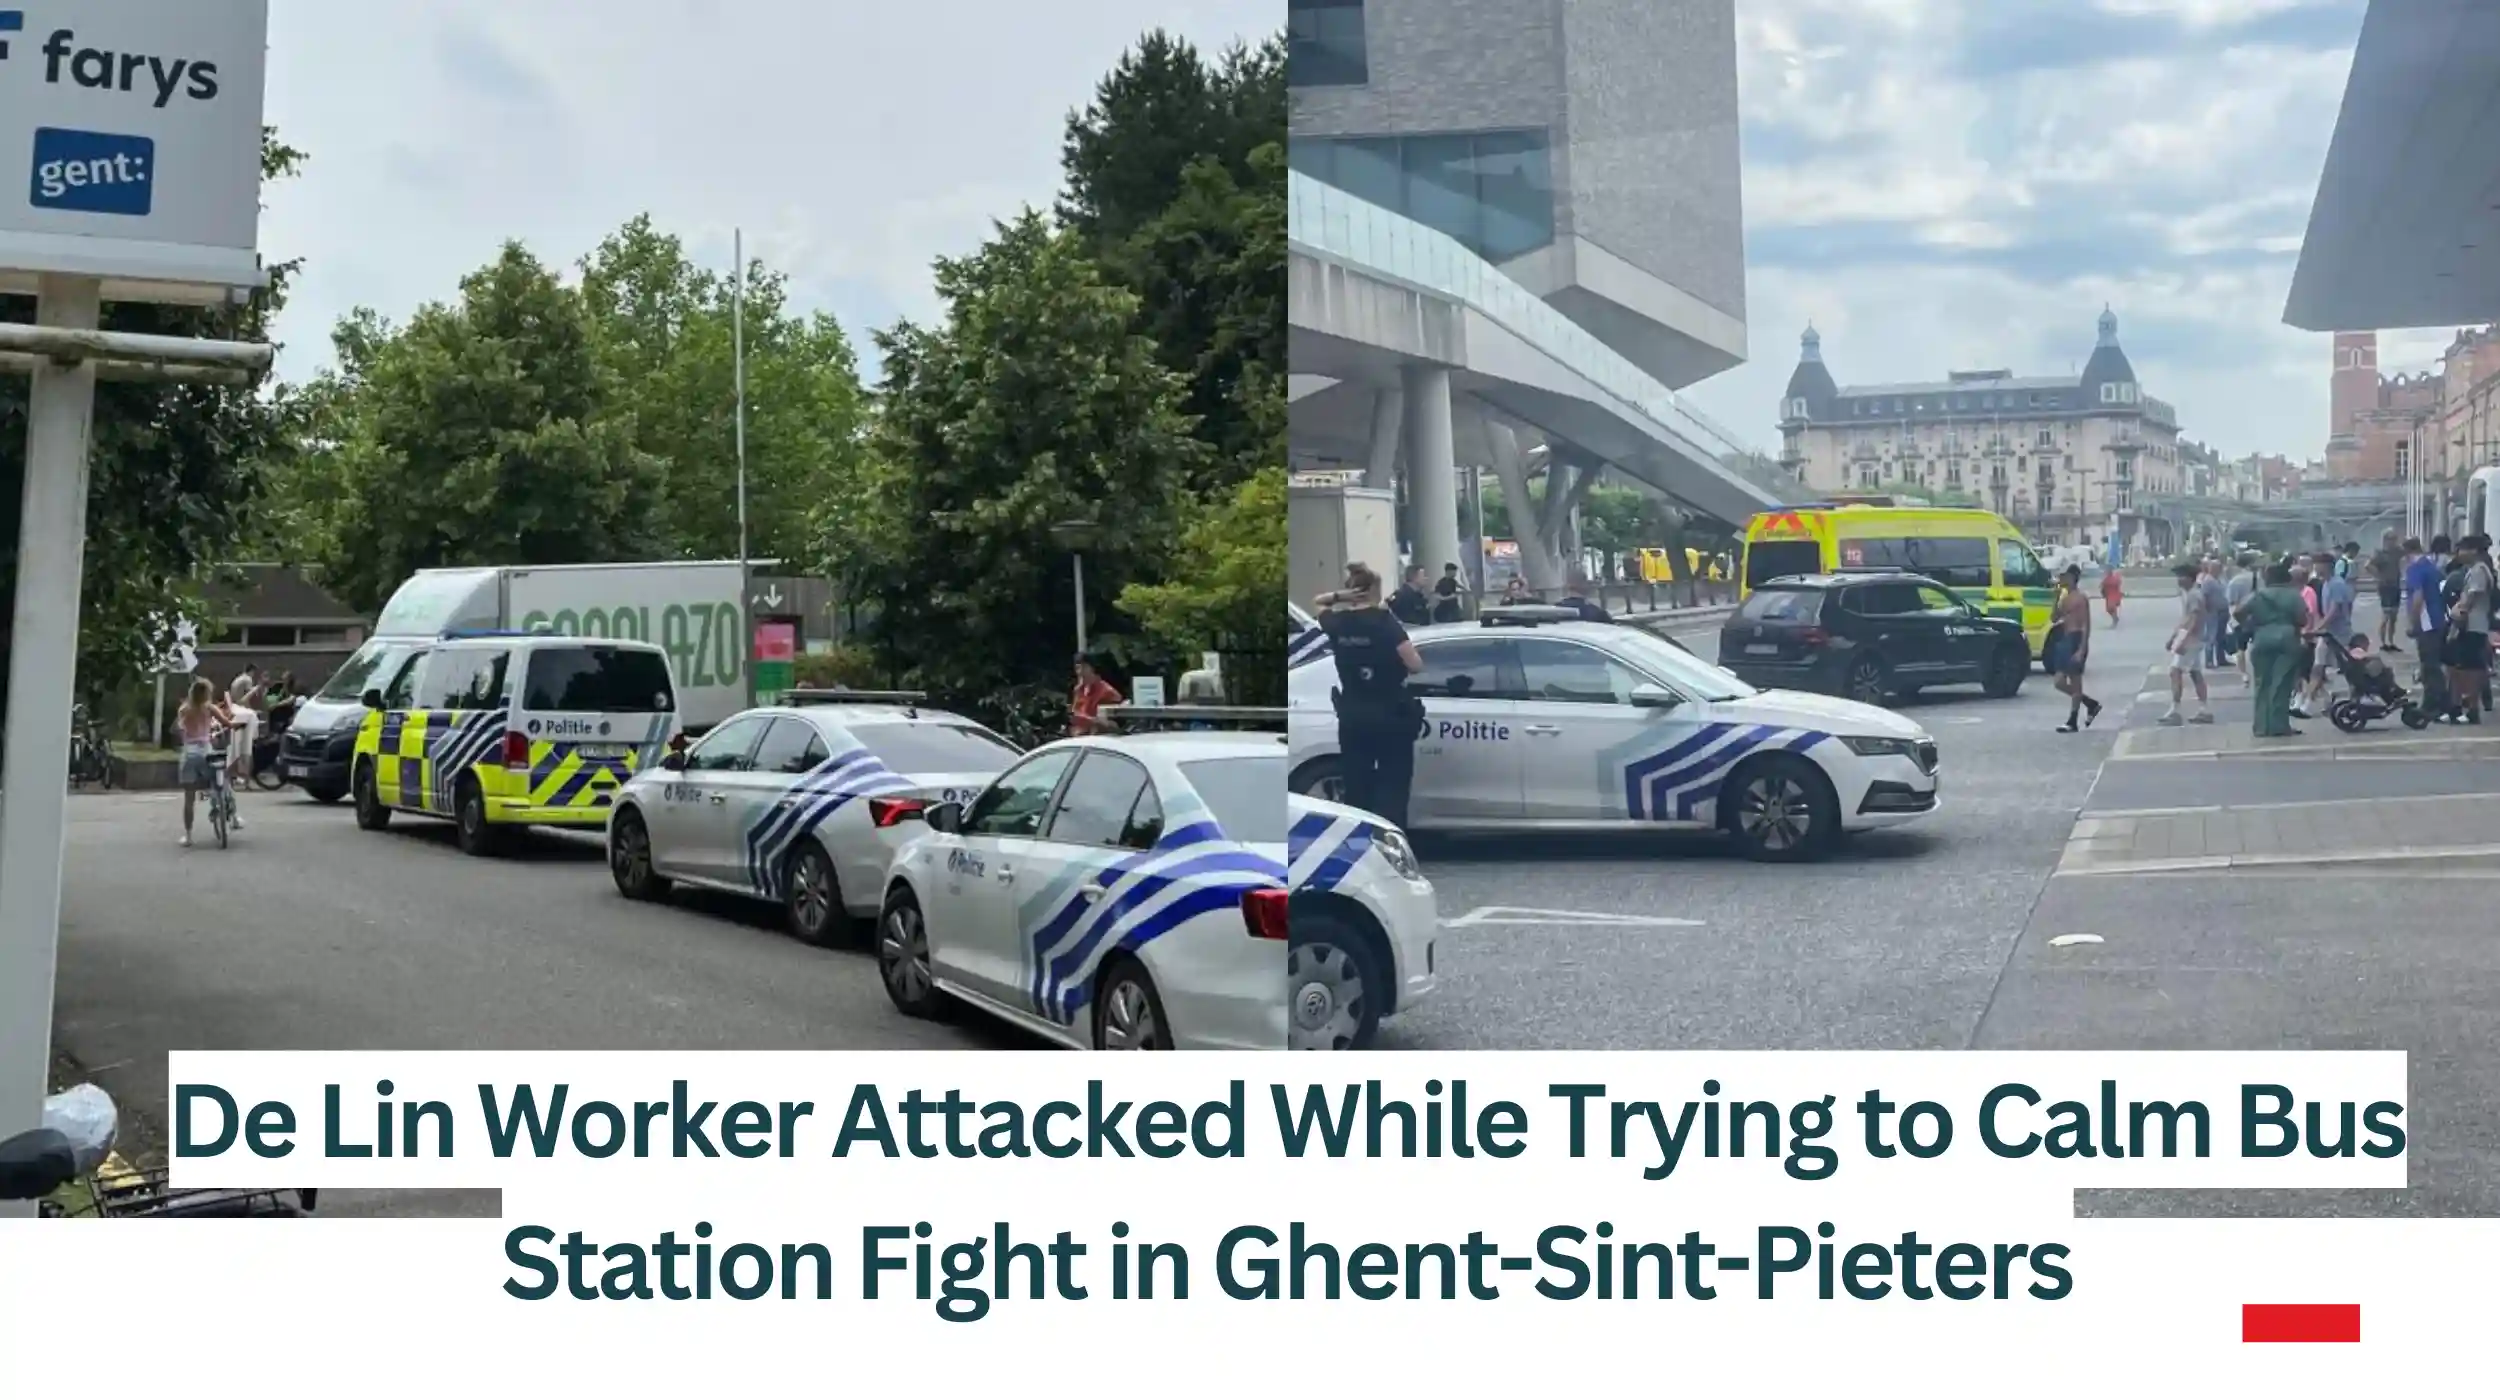 De-Lin-Worker-Attacked-While-Trying-to-Calm-Bus-Station-Fight-in-Ghent-Sint-Pieters